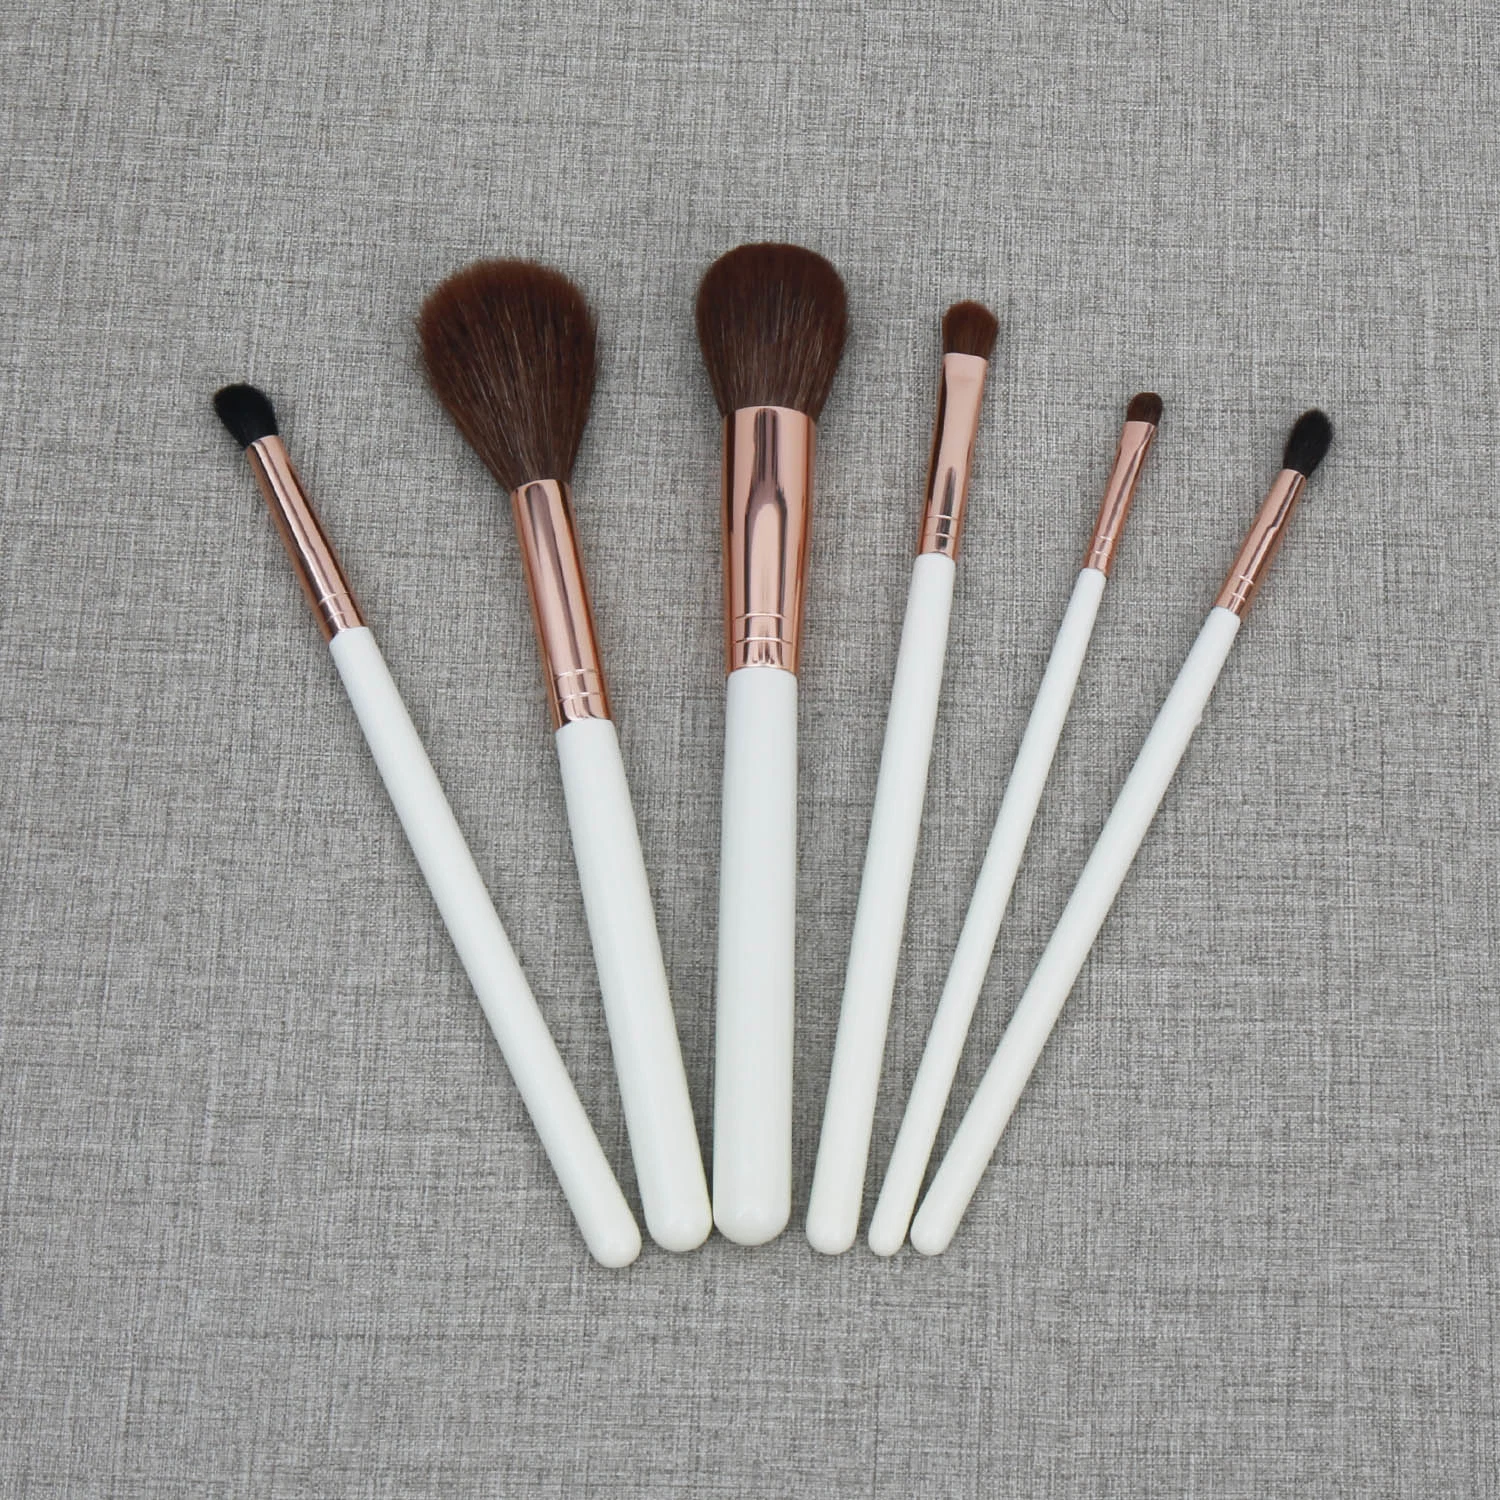 Makeup Brush Cosmetic Beauty Tool Kits with Synthetic Hair Makeup Brush Professional